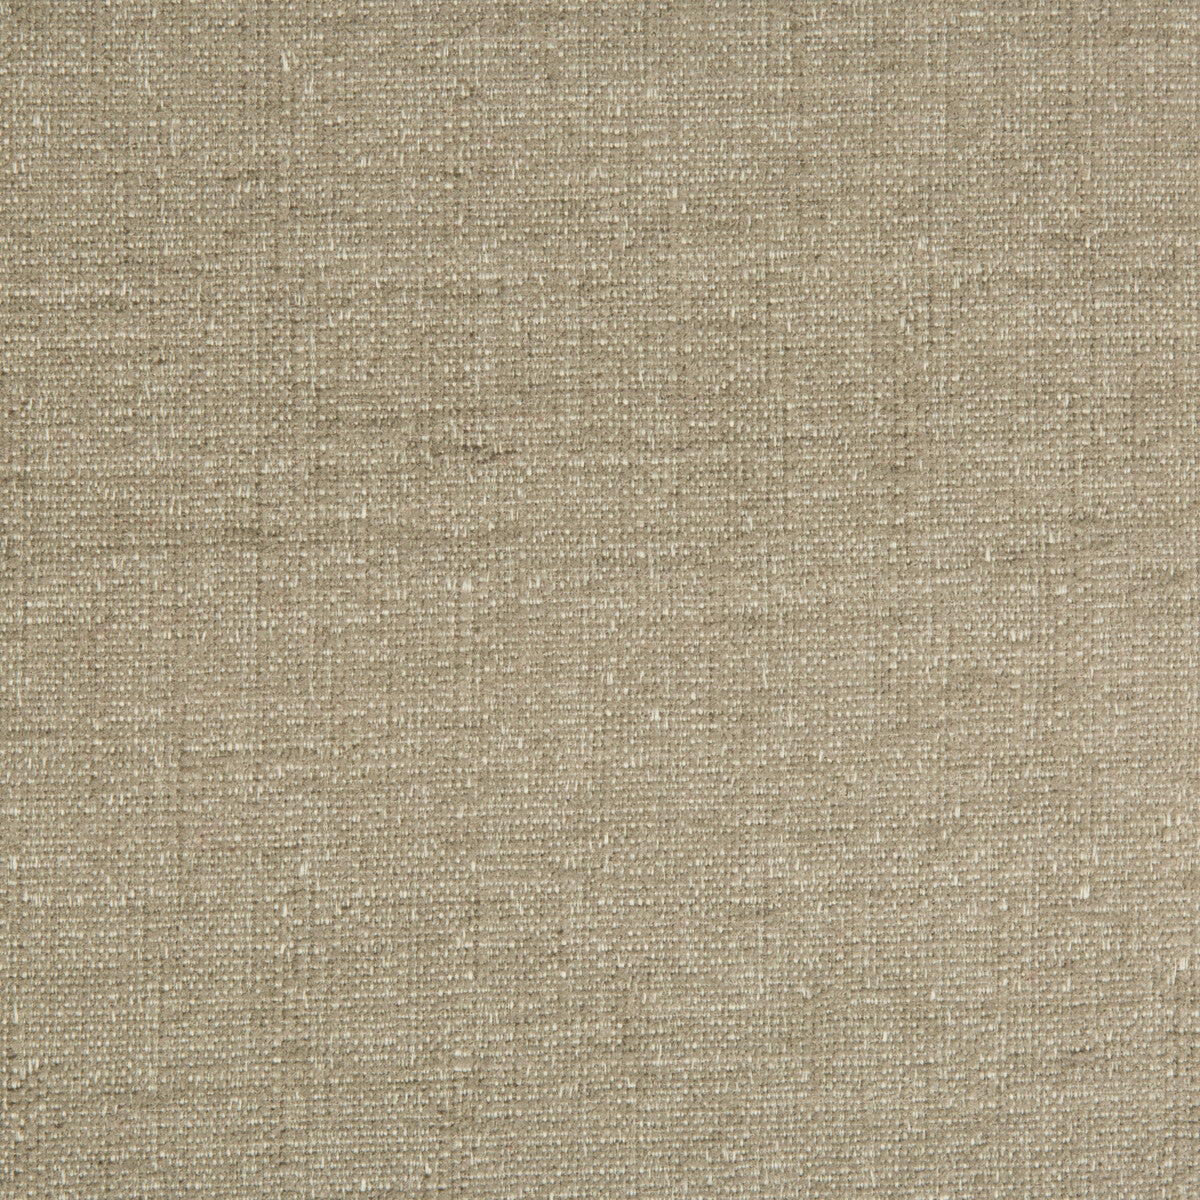 Kravet Smart fabric in 34622-11 color - pattern 34622.11.0 - by Kravet Smart in the Performance Crypton Home collection